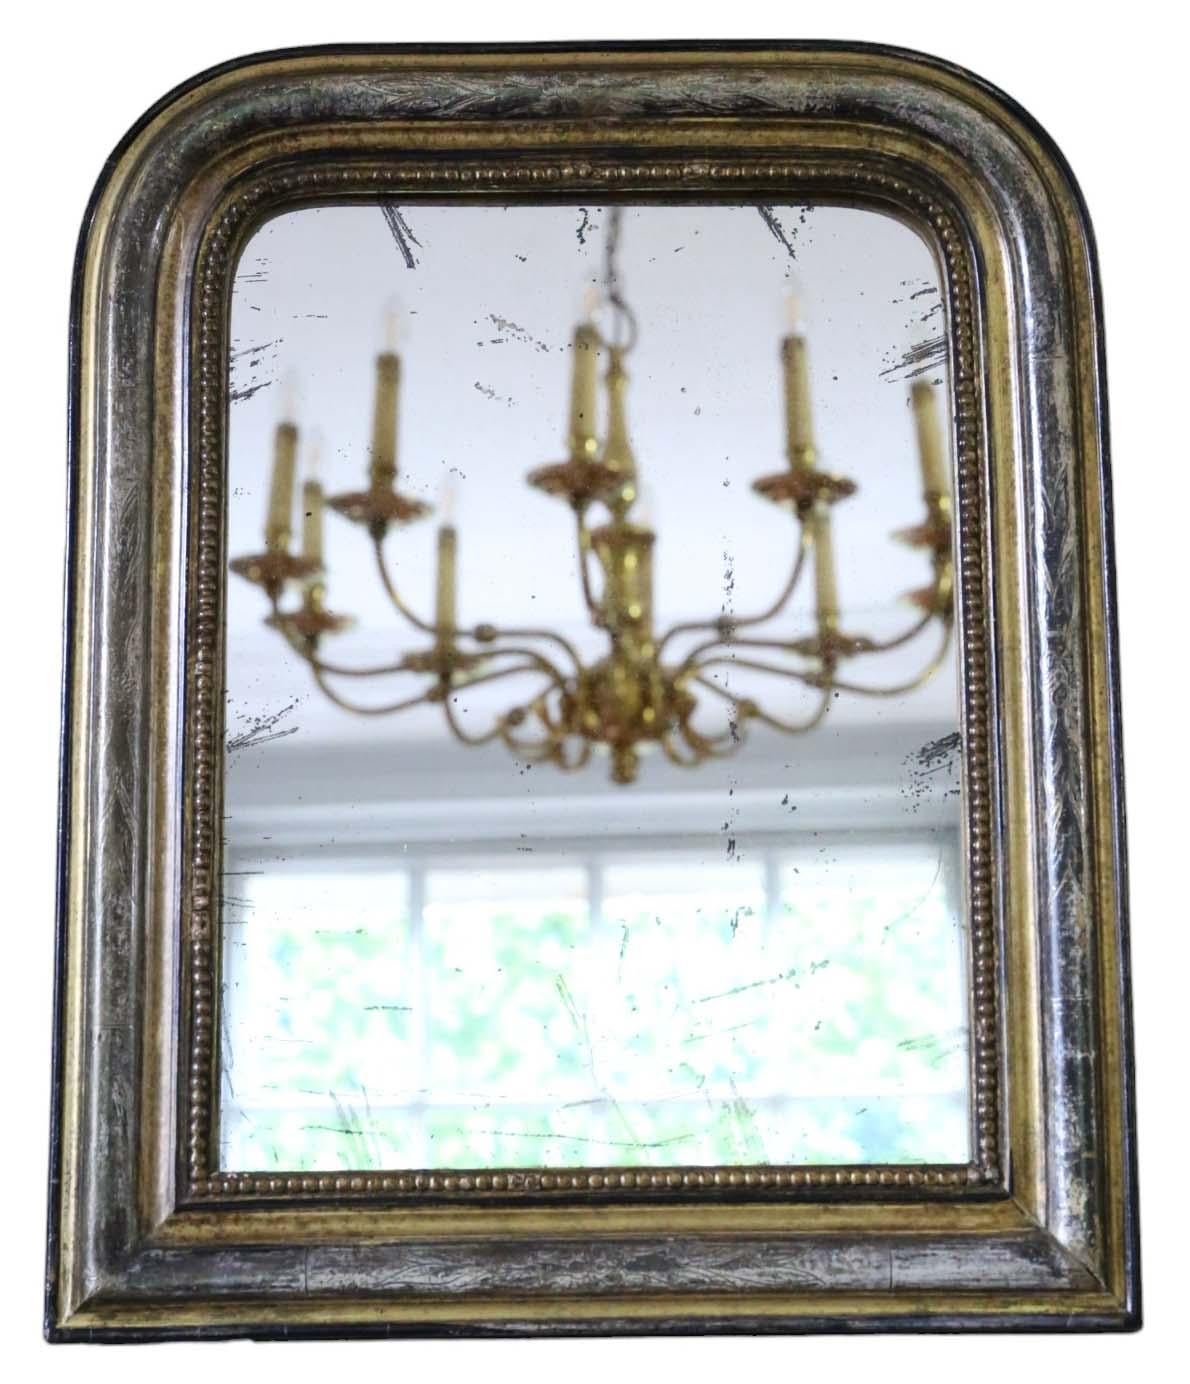 Antique small gilt overmantle wall mirror from the 19th Century, showcasing quality craftsmanship.

This mirror captivates with its modest proportions, imparting character to any suitable space. The frame boasts sturdy construction, free from loose